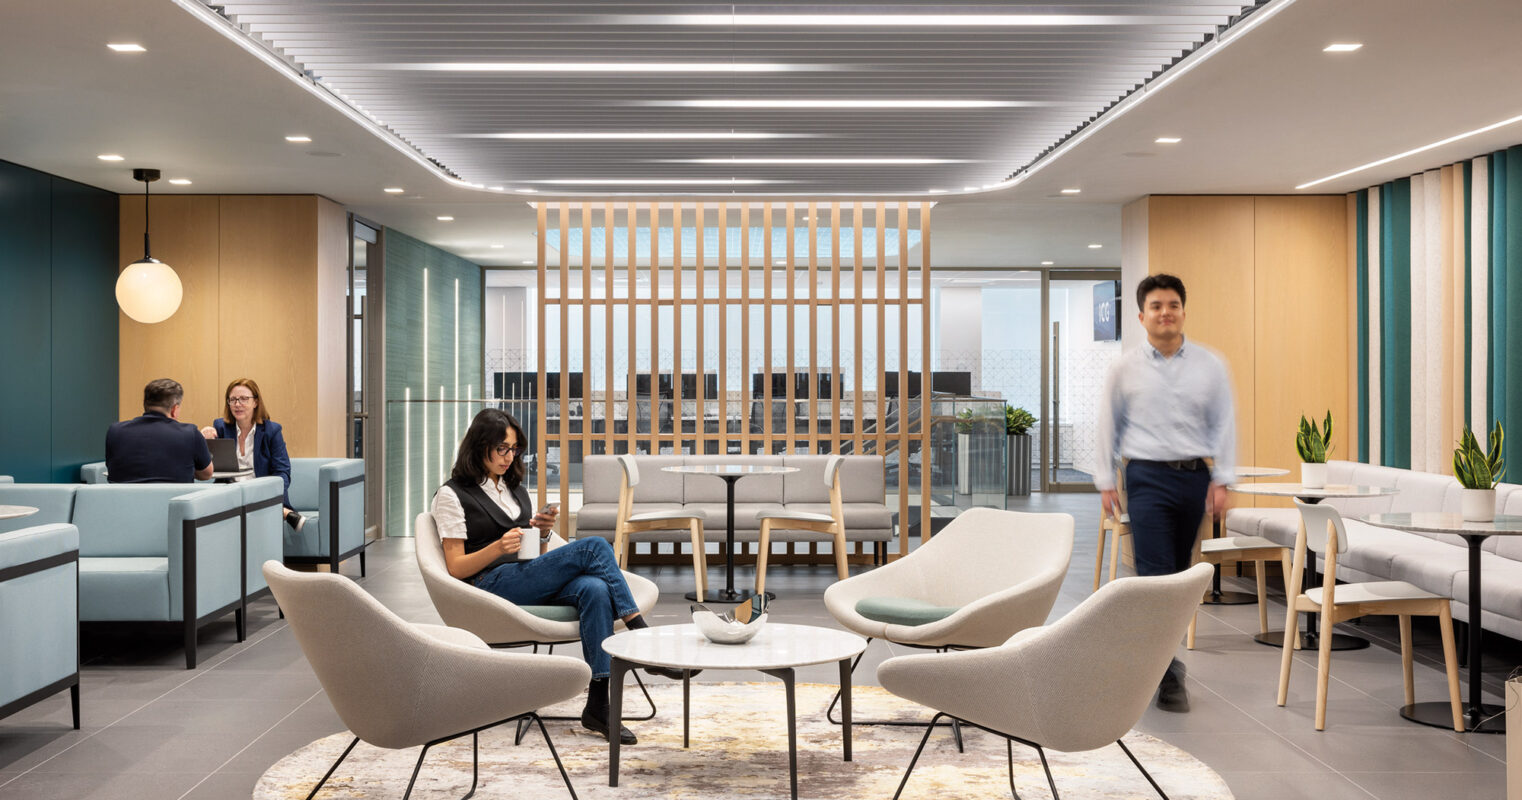 A modern office space featuring a blend of sleek architectural design with natural elements, incorporating a striking staircase, lush indoor plants, and a designated hub area for work and collaboration.